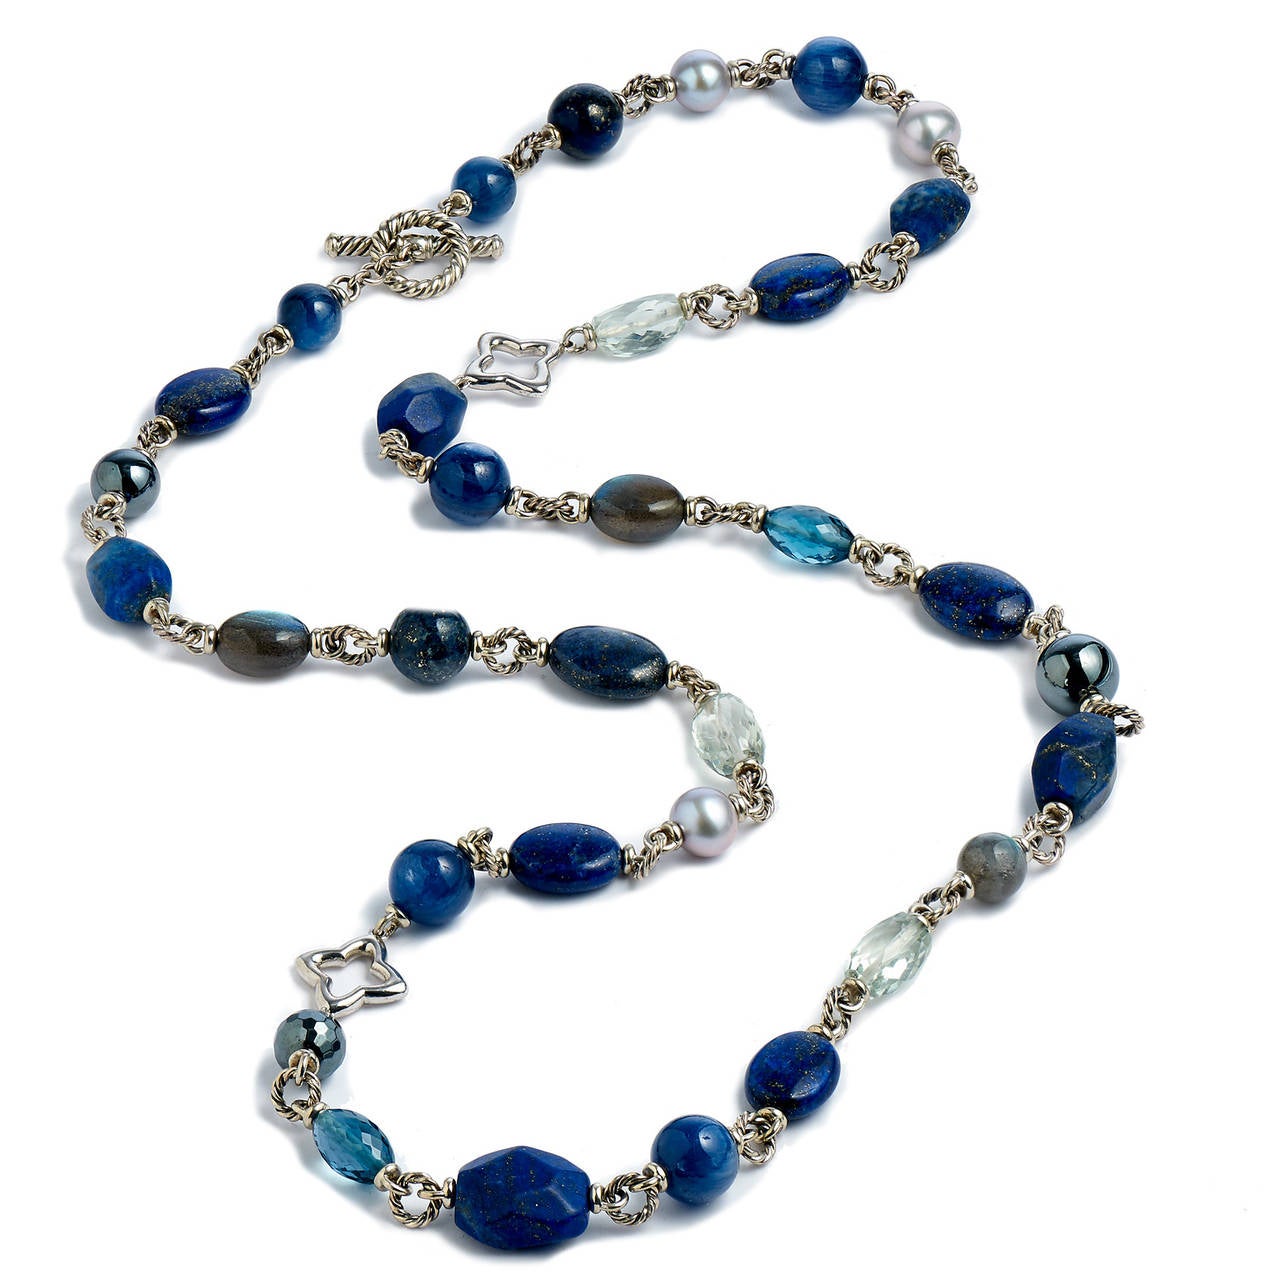 The colorful world of stones are storytellers, speaking to moods, personalities and tempos. This David Yurman sterling silver necklace features a restful palate of blue hues composed of lapis lazuli, labradonite, prasiolite, London blue topaz,